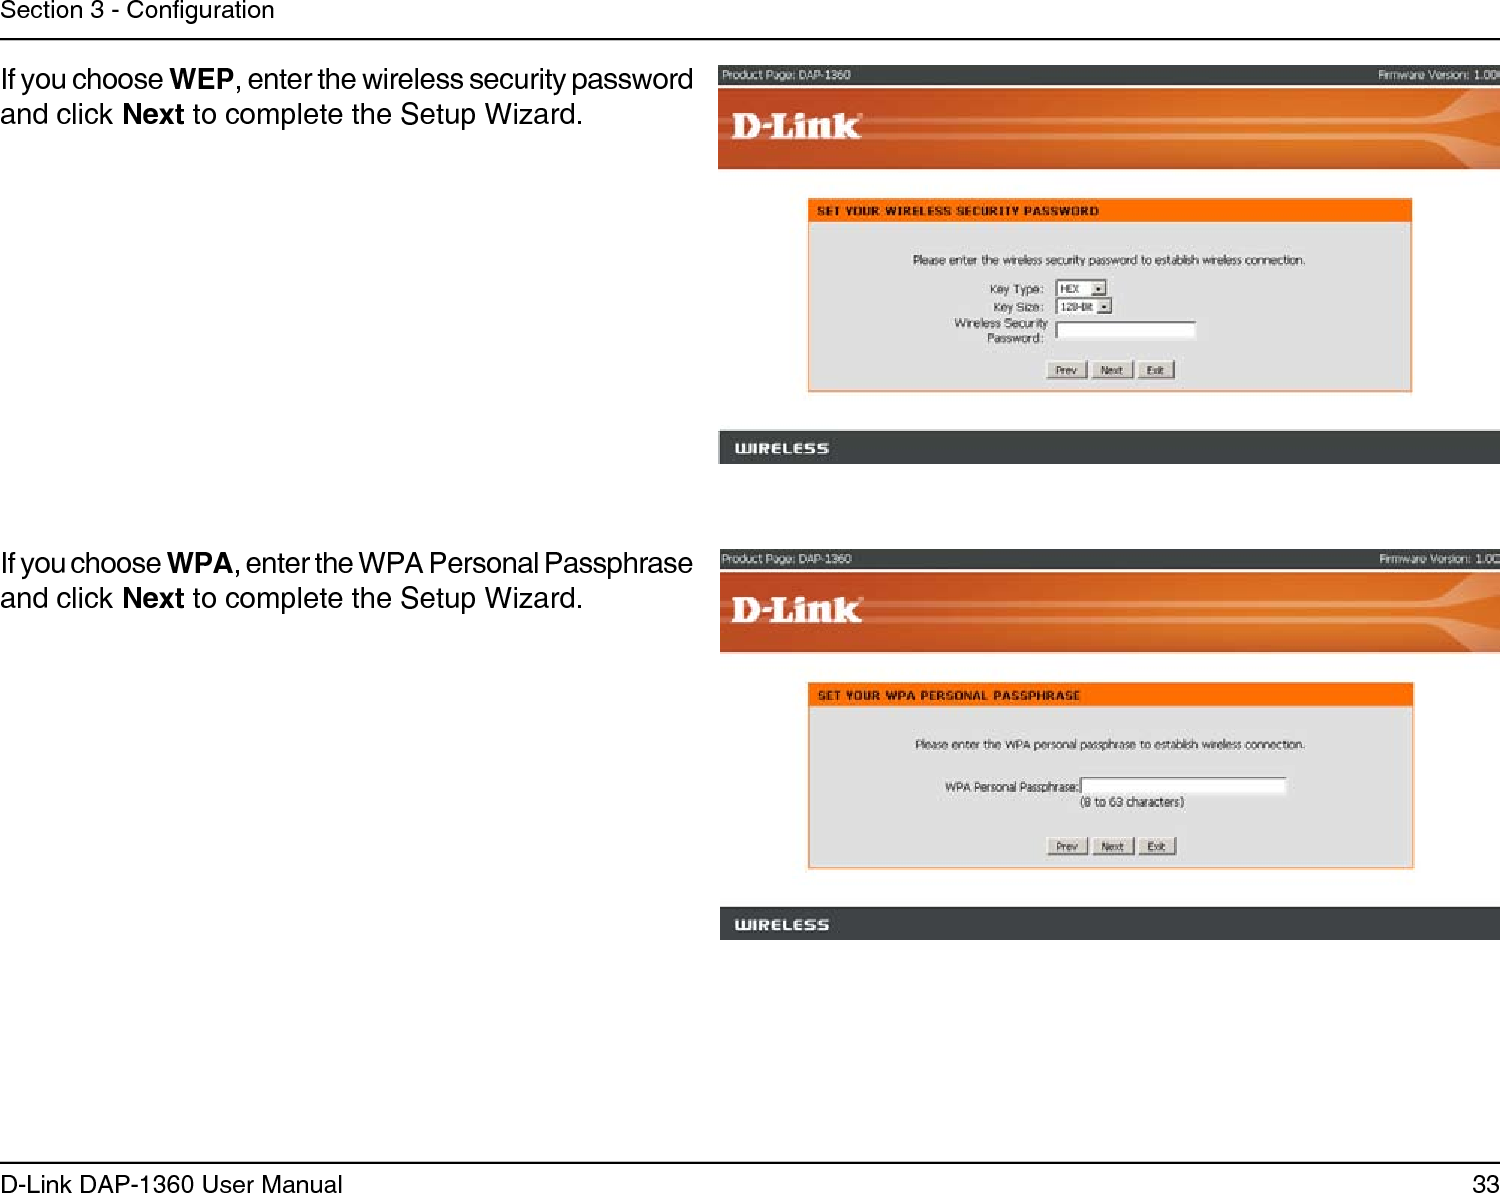 33D-Link DAP-1360 User ManualSection 3 - CongurationIf you choose WEP, enter the wireless security password and click Next to complete the Setup Wizard.If you choose WPA, enter the WPA Personal Passphrase and click Next to complete the Setup Wizard.